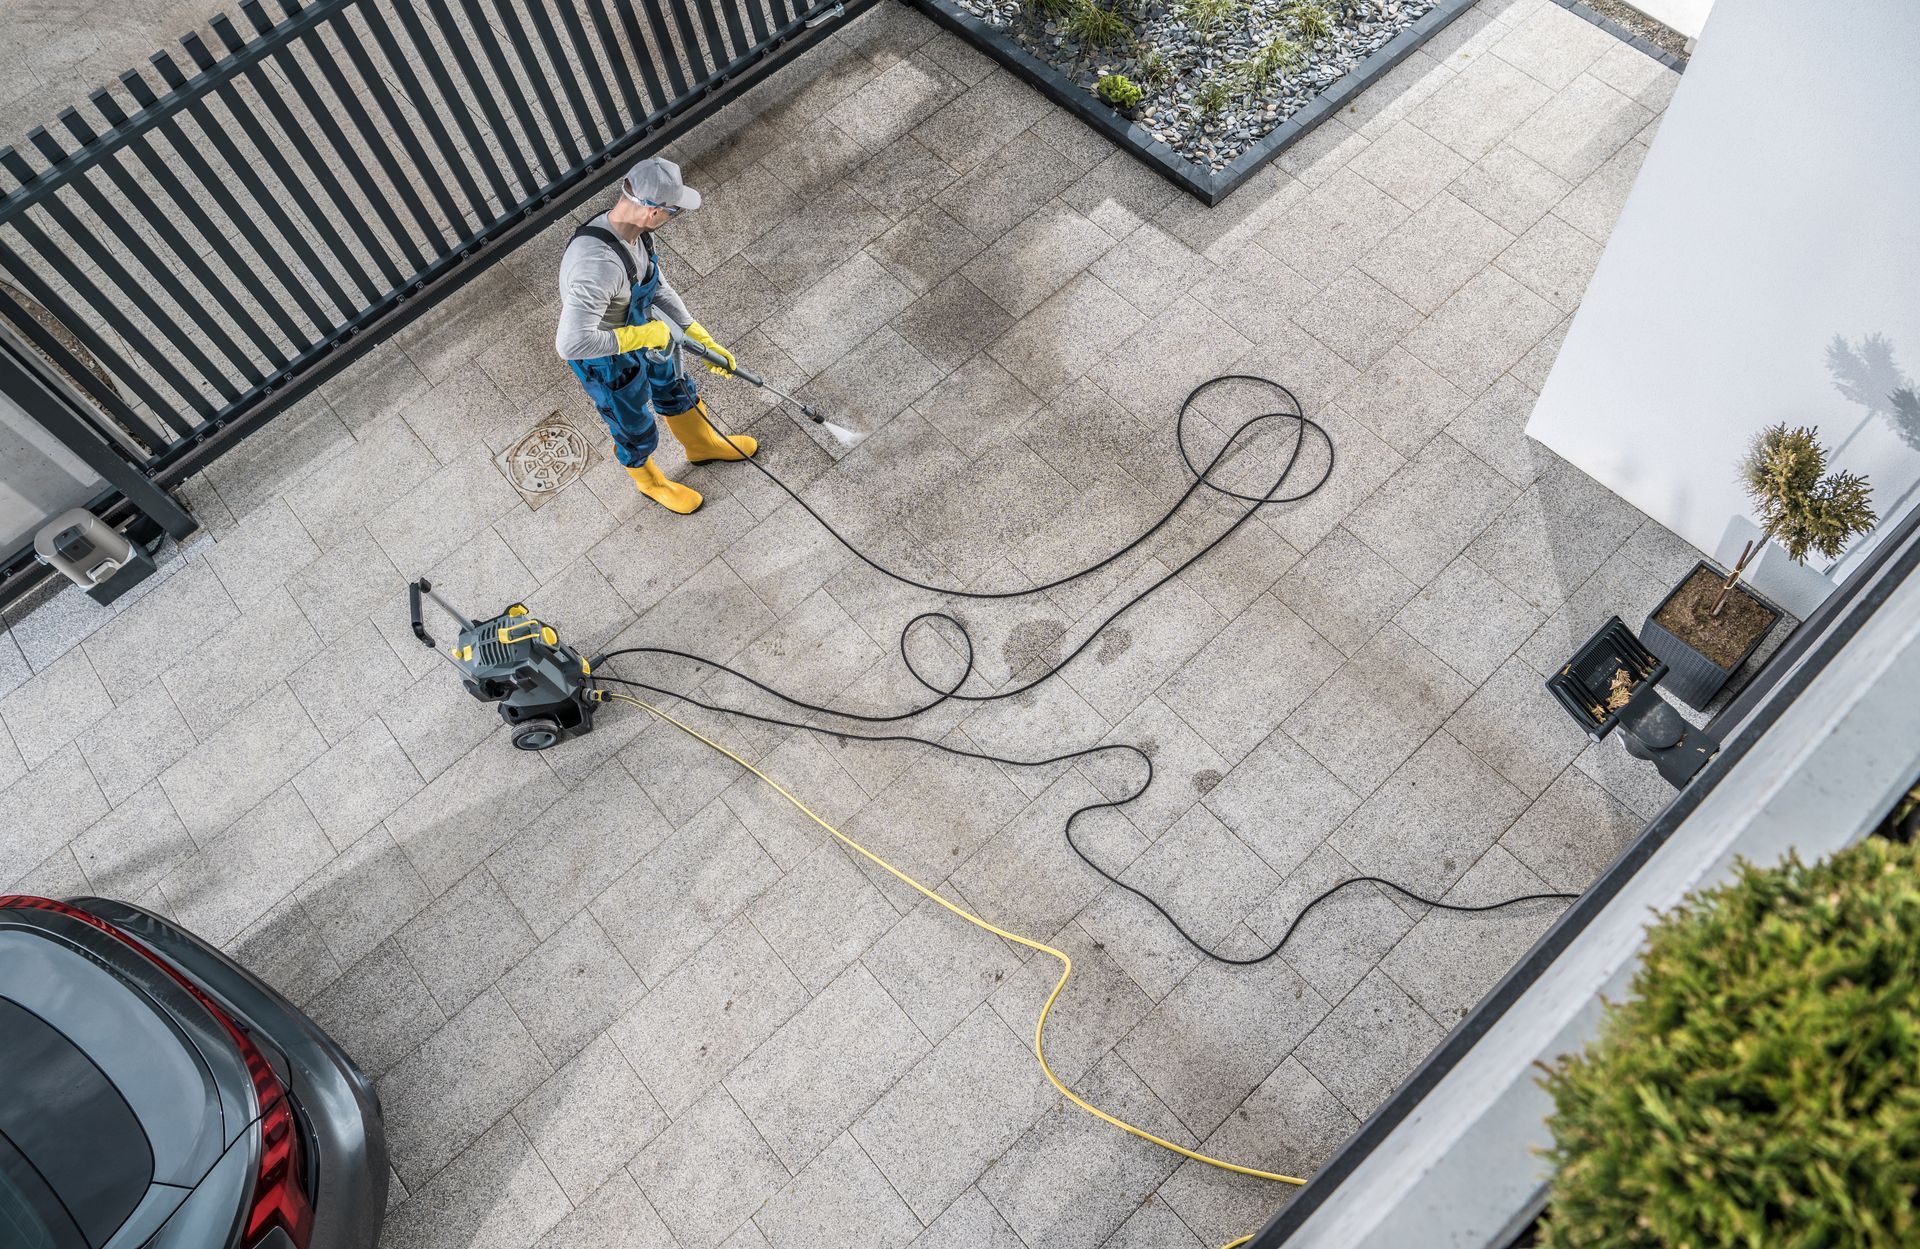 Man Cleaning the Concrete Driveway